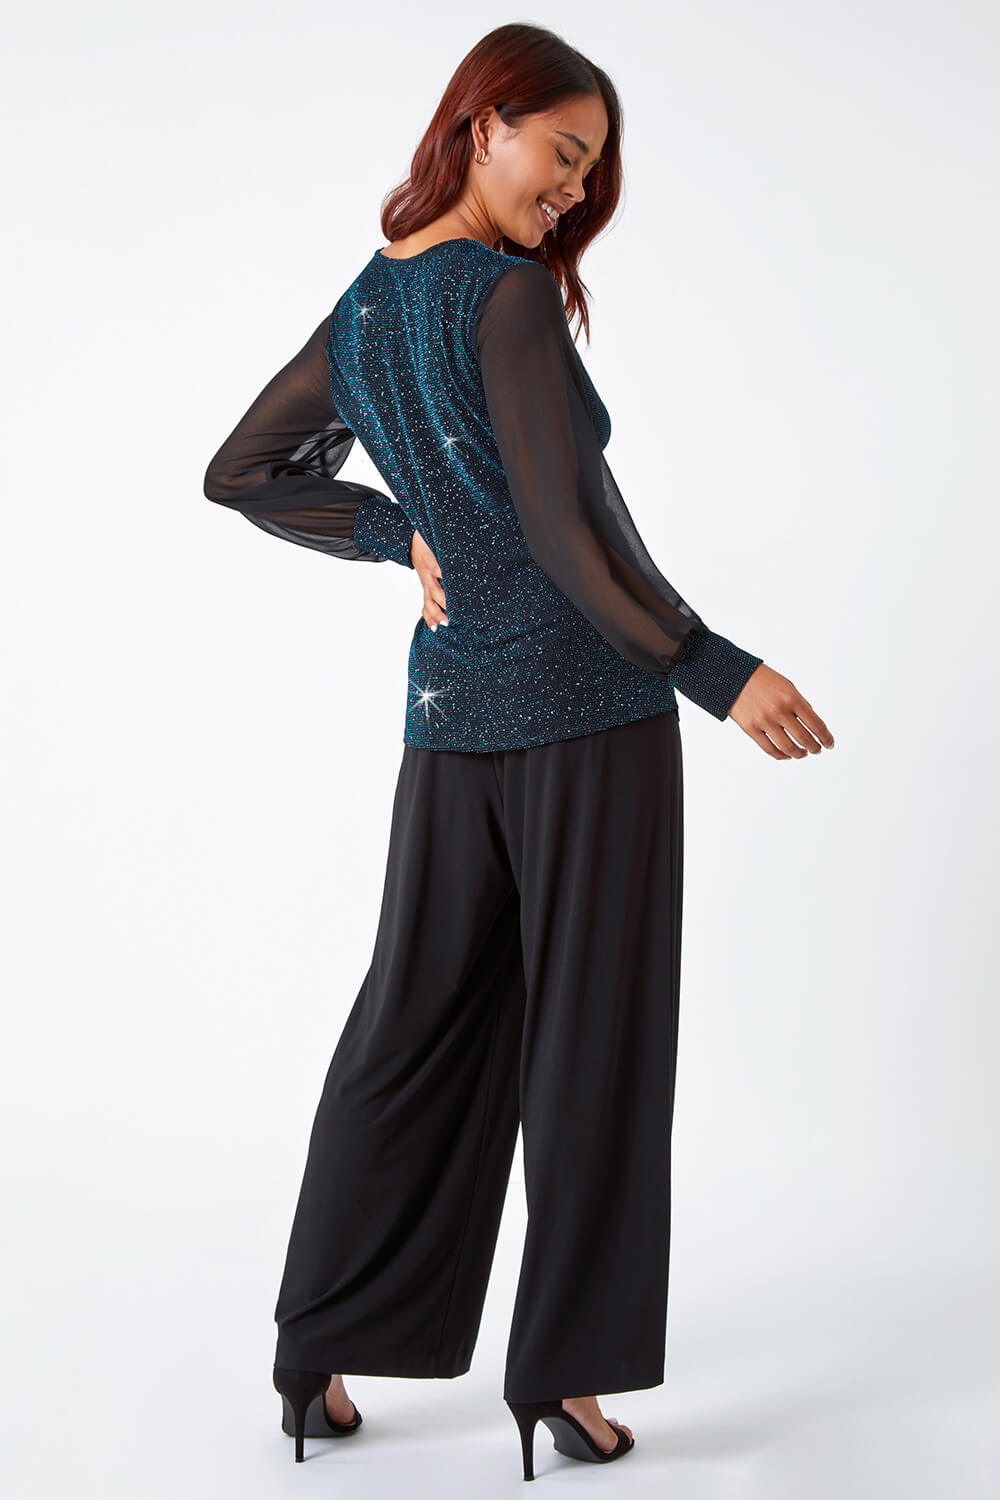 Teal Petite Twist Front Chiffon Sleeve Stretch Top, Image 3 of 5